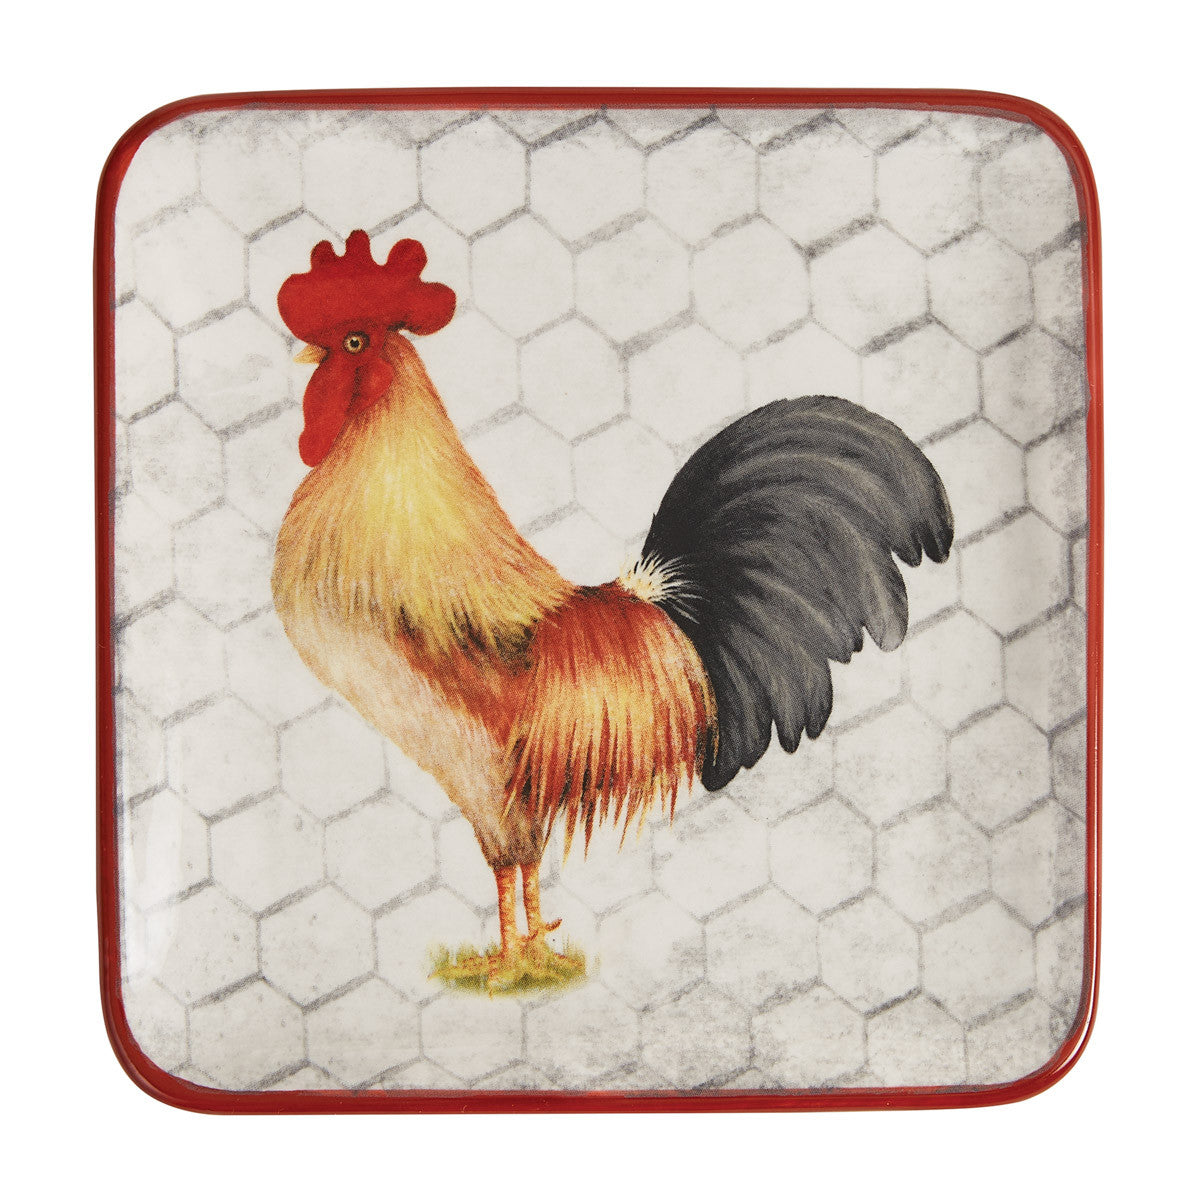 Break Of Day Rooster Spoon Rest - Park Designs